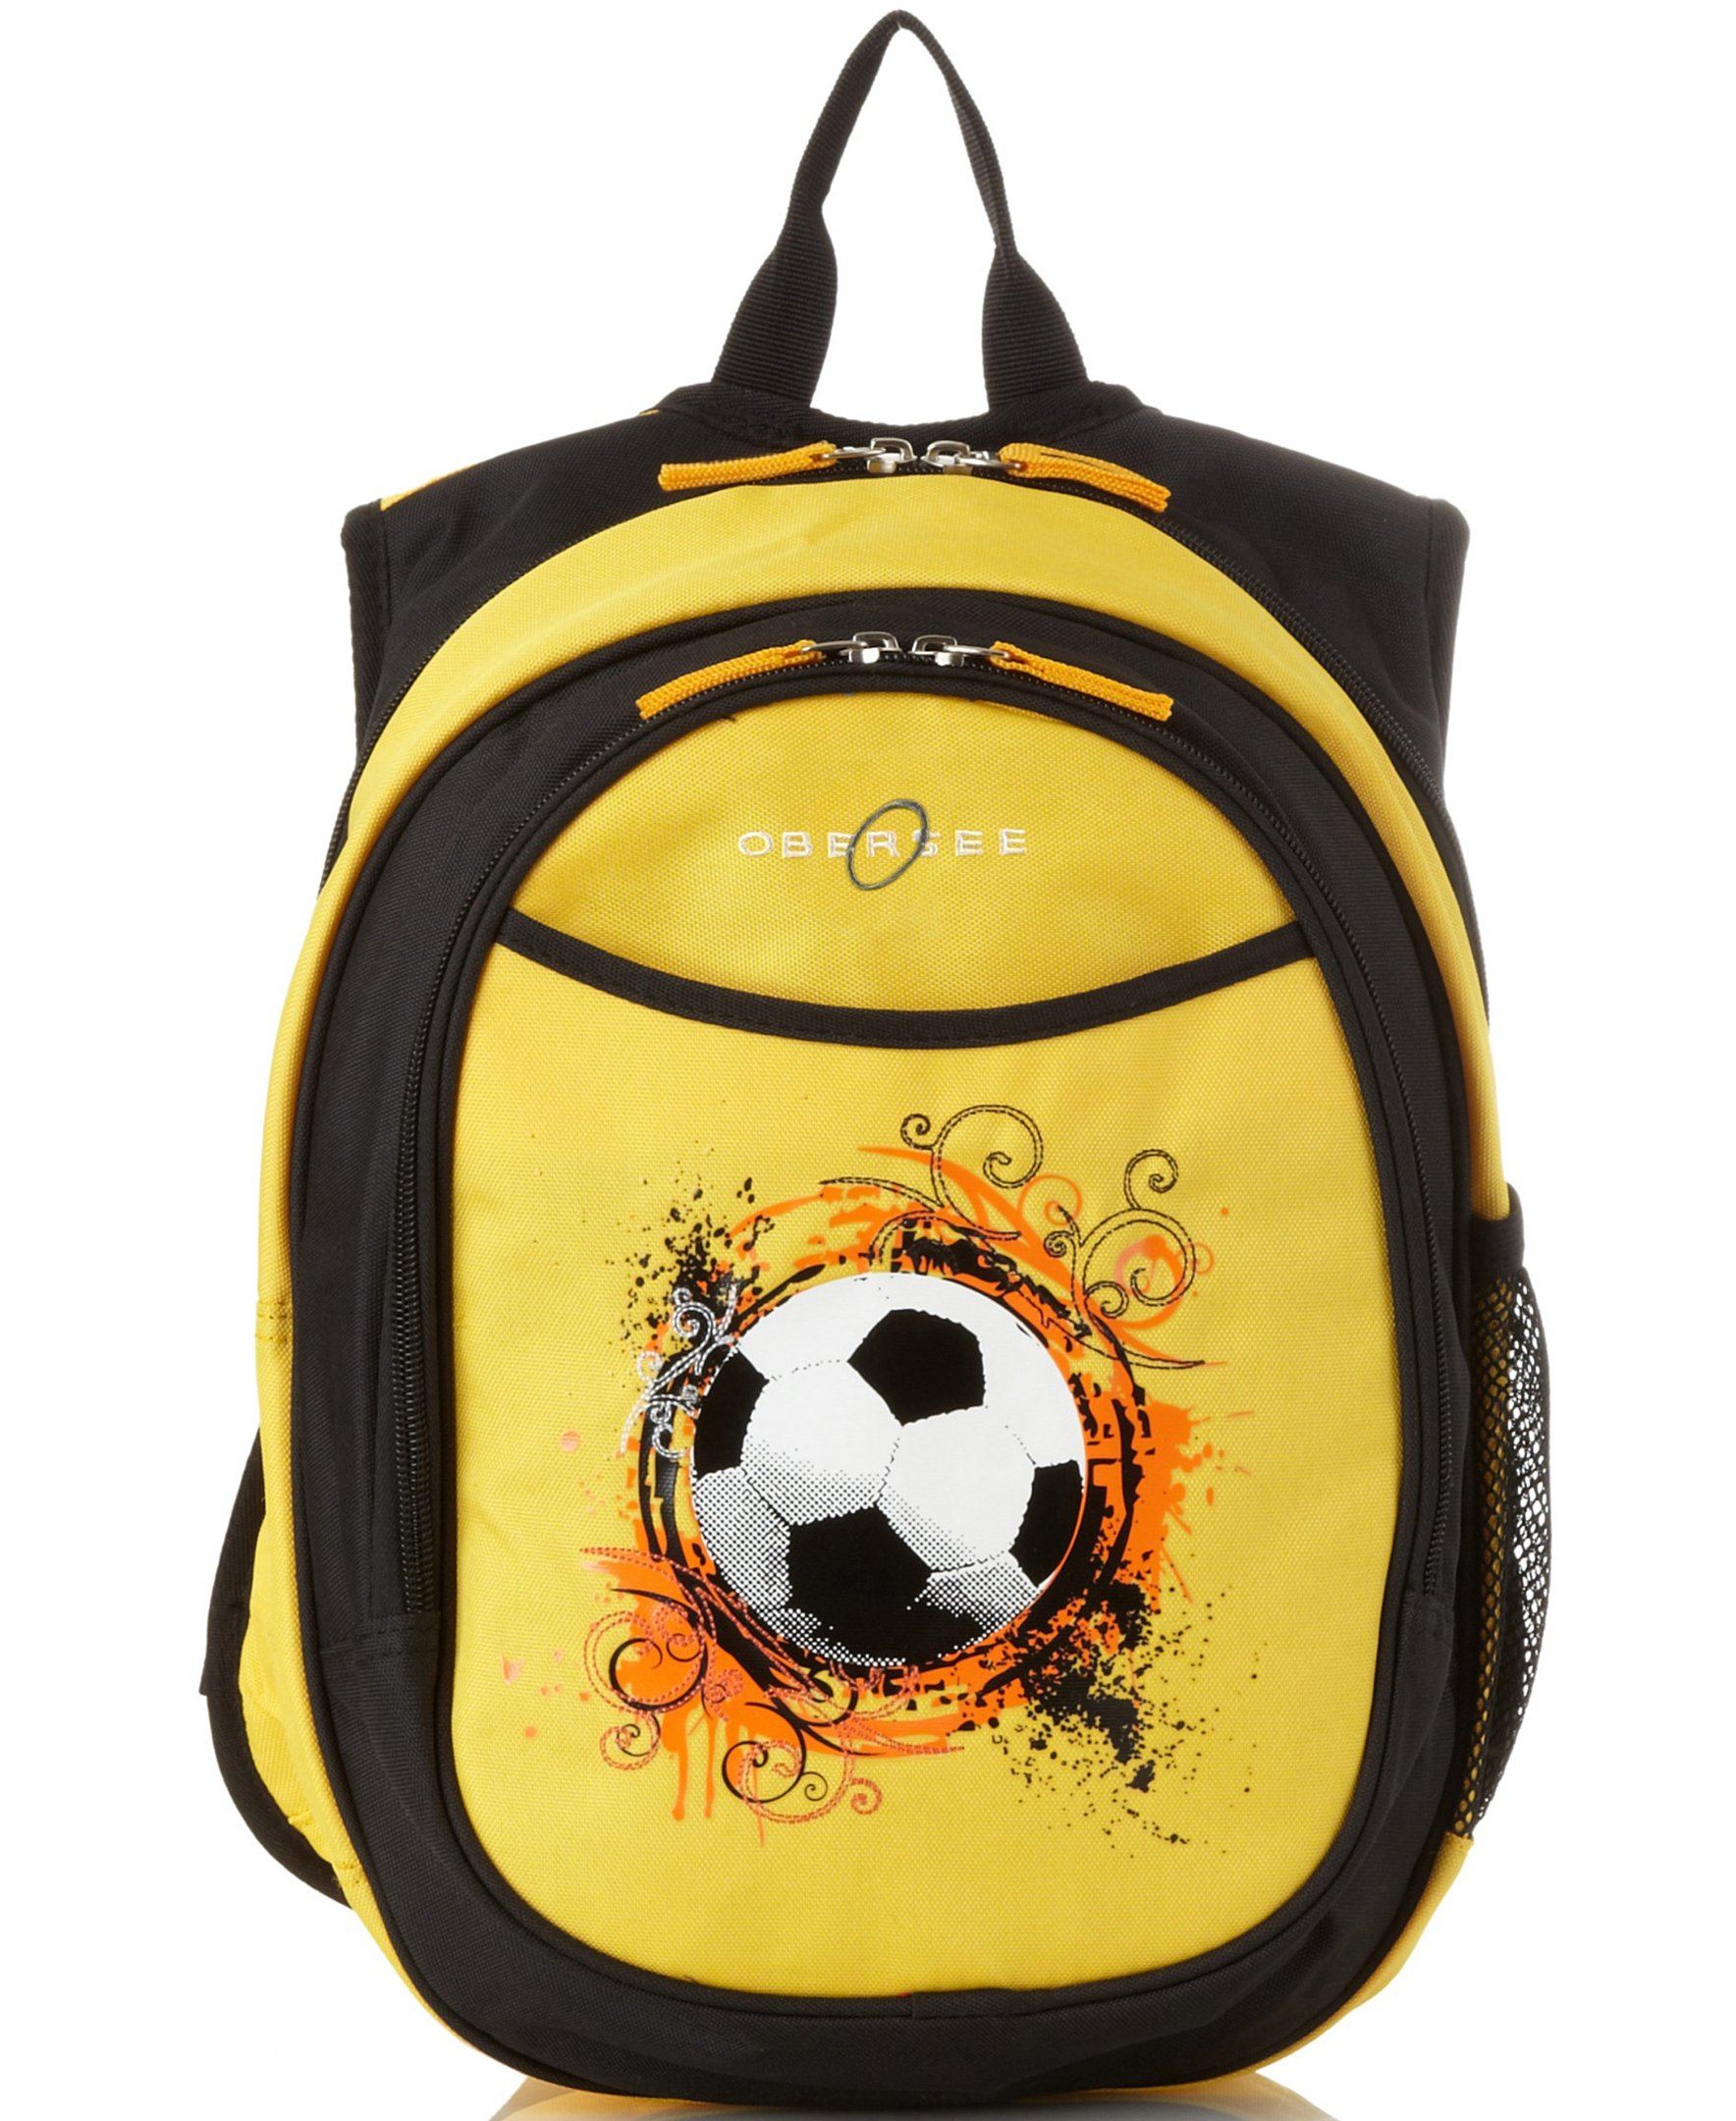 O3KCBP015 Obersee Mini Preschool All-in-One Backpack for Toddlers and Kids with integrated Insulated Cooler | Yellow Soccer - image 1 of 6